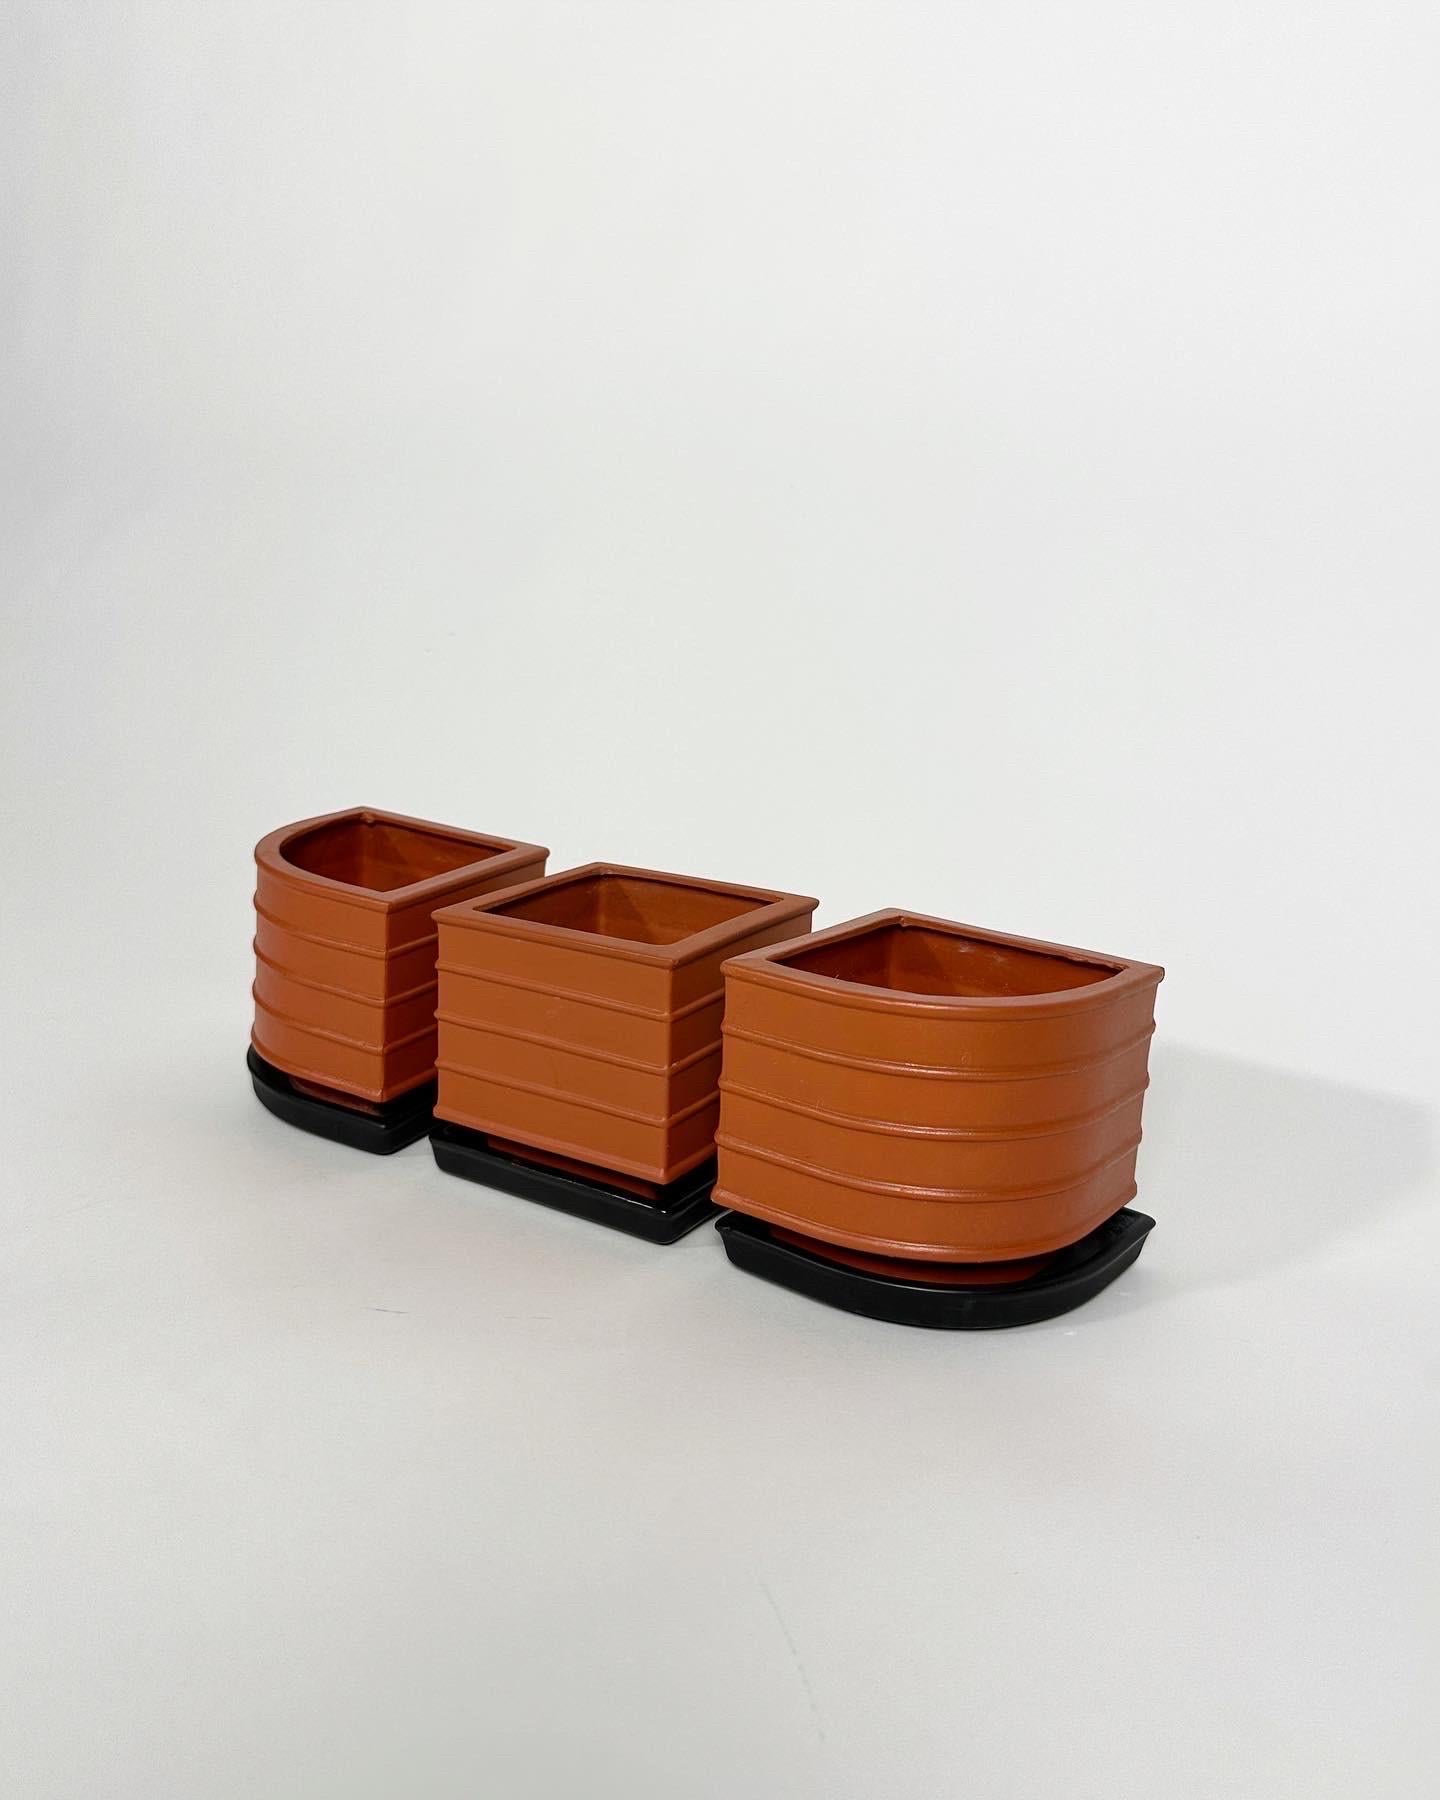 Set of three Wilhelm Kåge terracotta planters for Gustavsberg in Sweden, circa 1940s. 

Very good condition, they have been cleaned, no cracks or damages. 

Width: 10 cm x 10 cm
Height: 10 cm